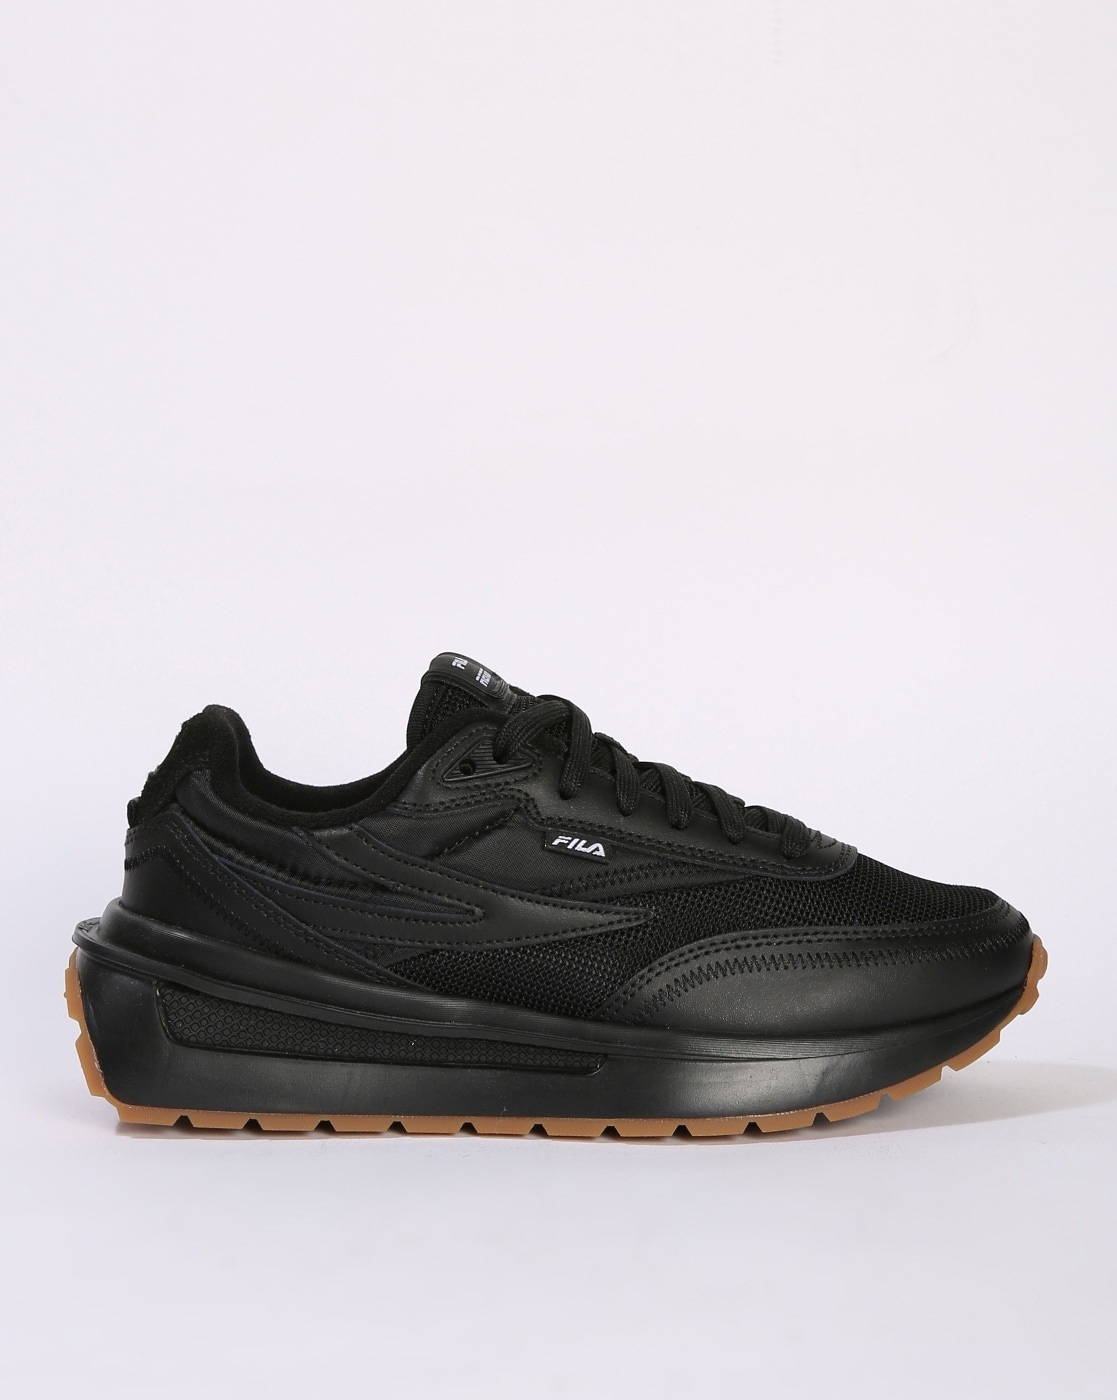 Which companys shoes are better Fila or Puma  Quora